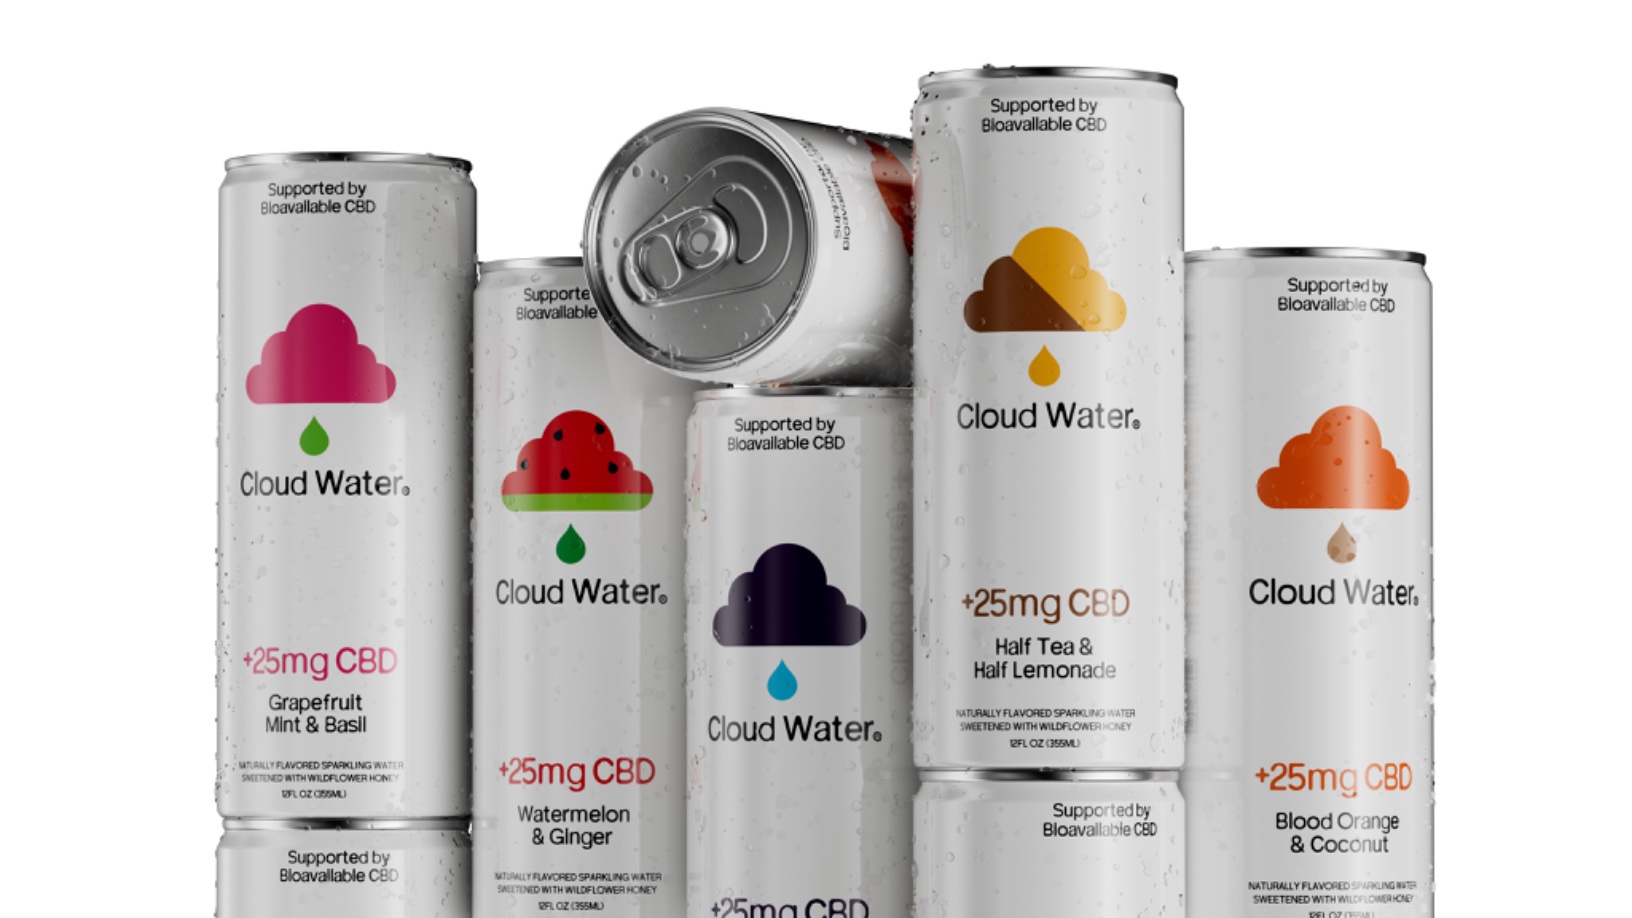 Energy Drinks Don’t Have To Be So Aggressive; Just Look At Cloud Water’s Packaging